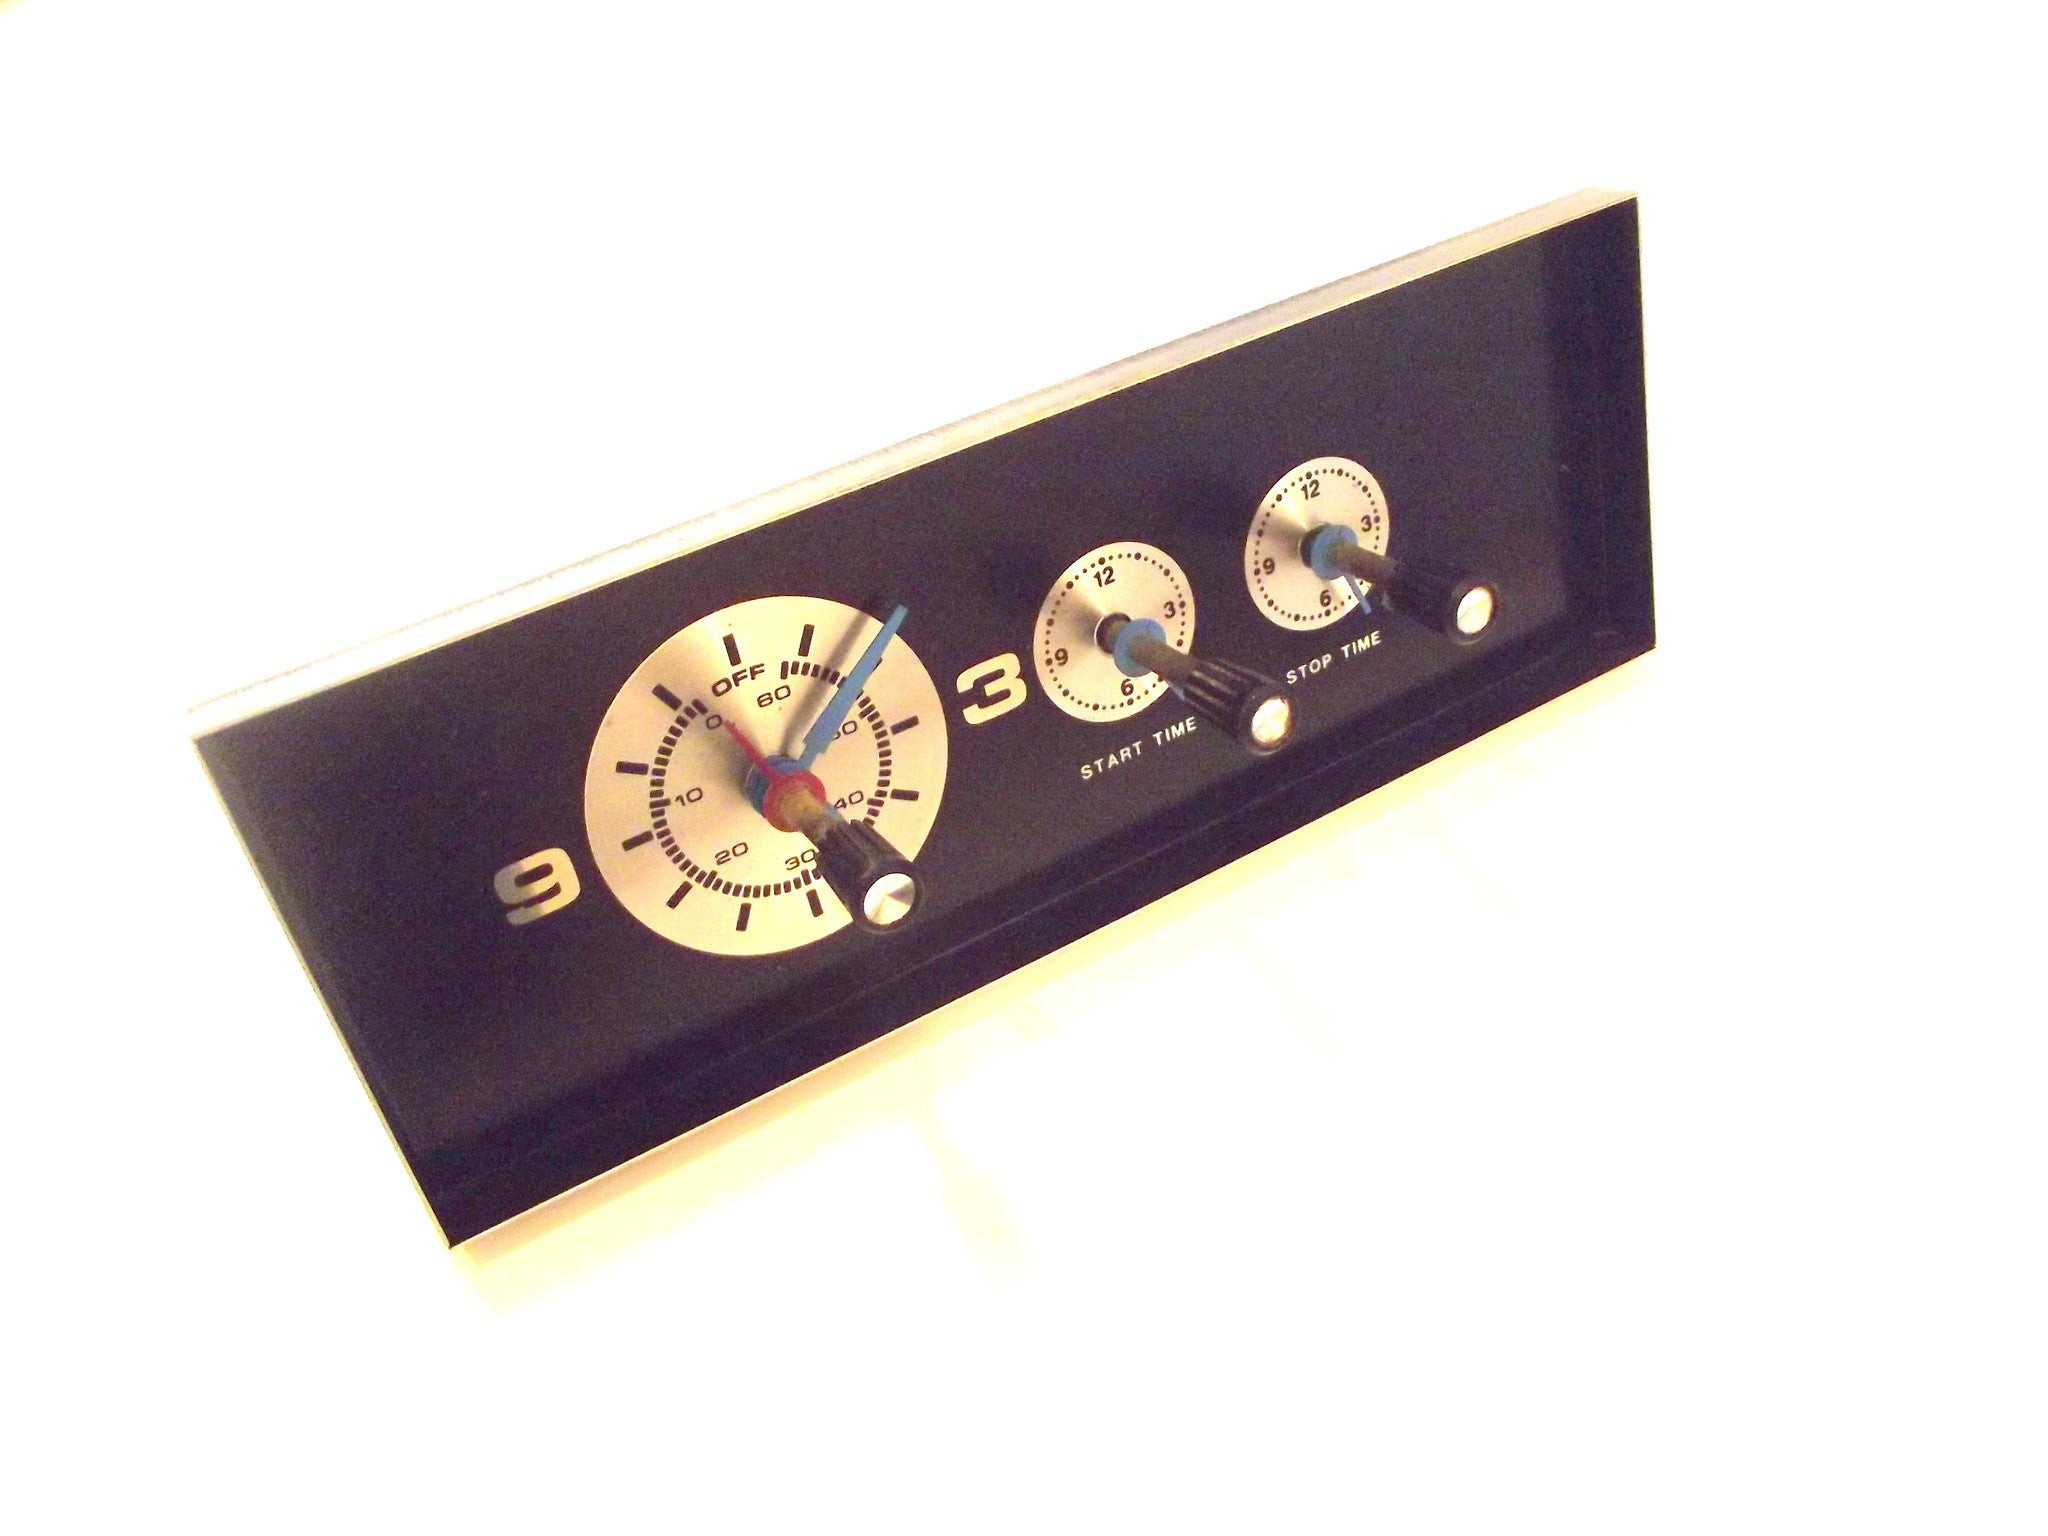 Range, Oven, Stove Clock and Timer